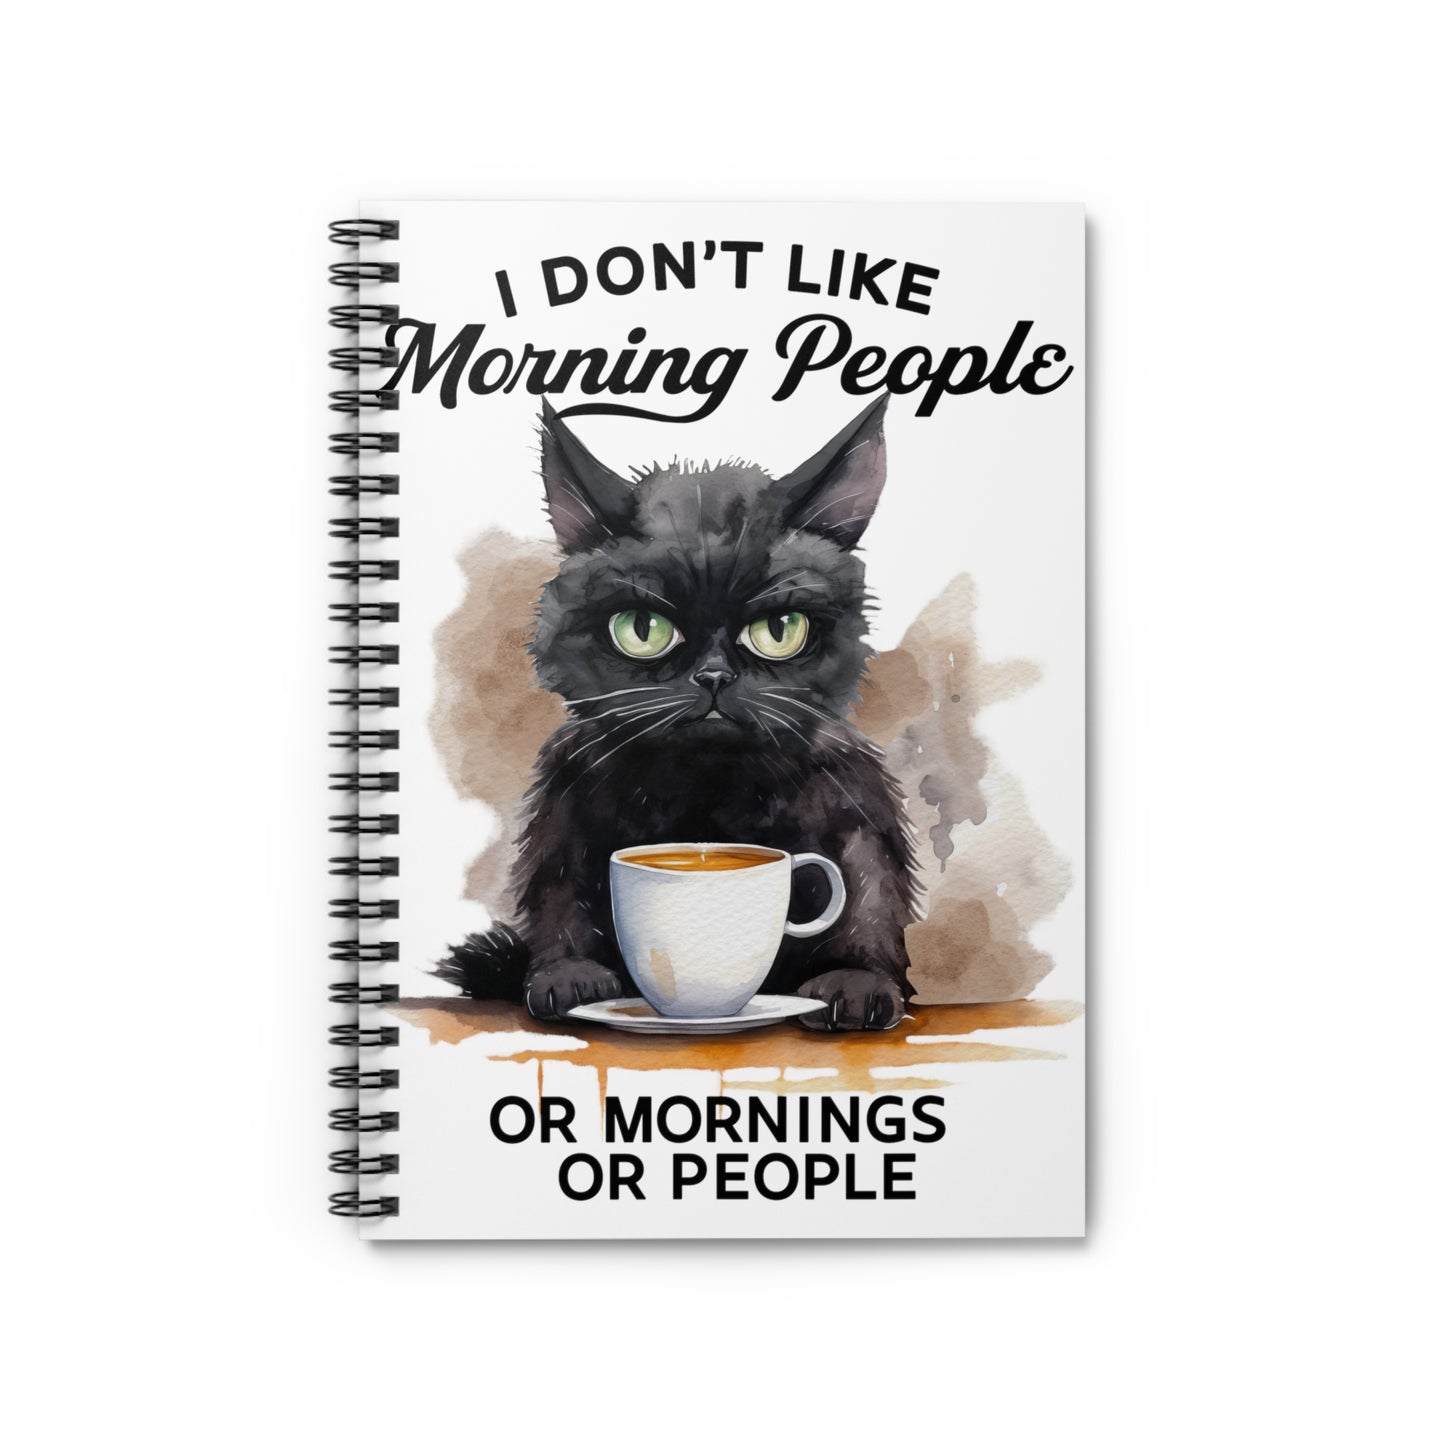 No mornings no people Spiral Notebook - Ruled Line